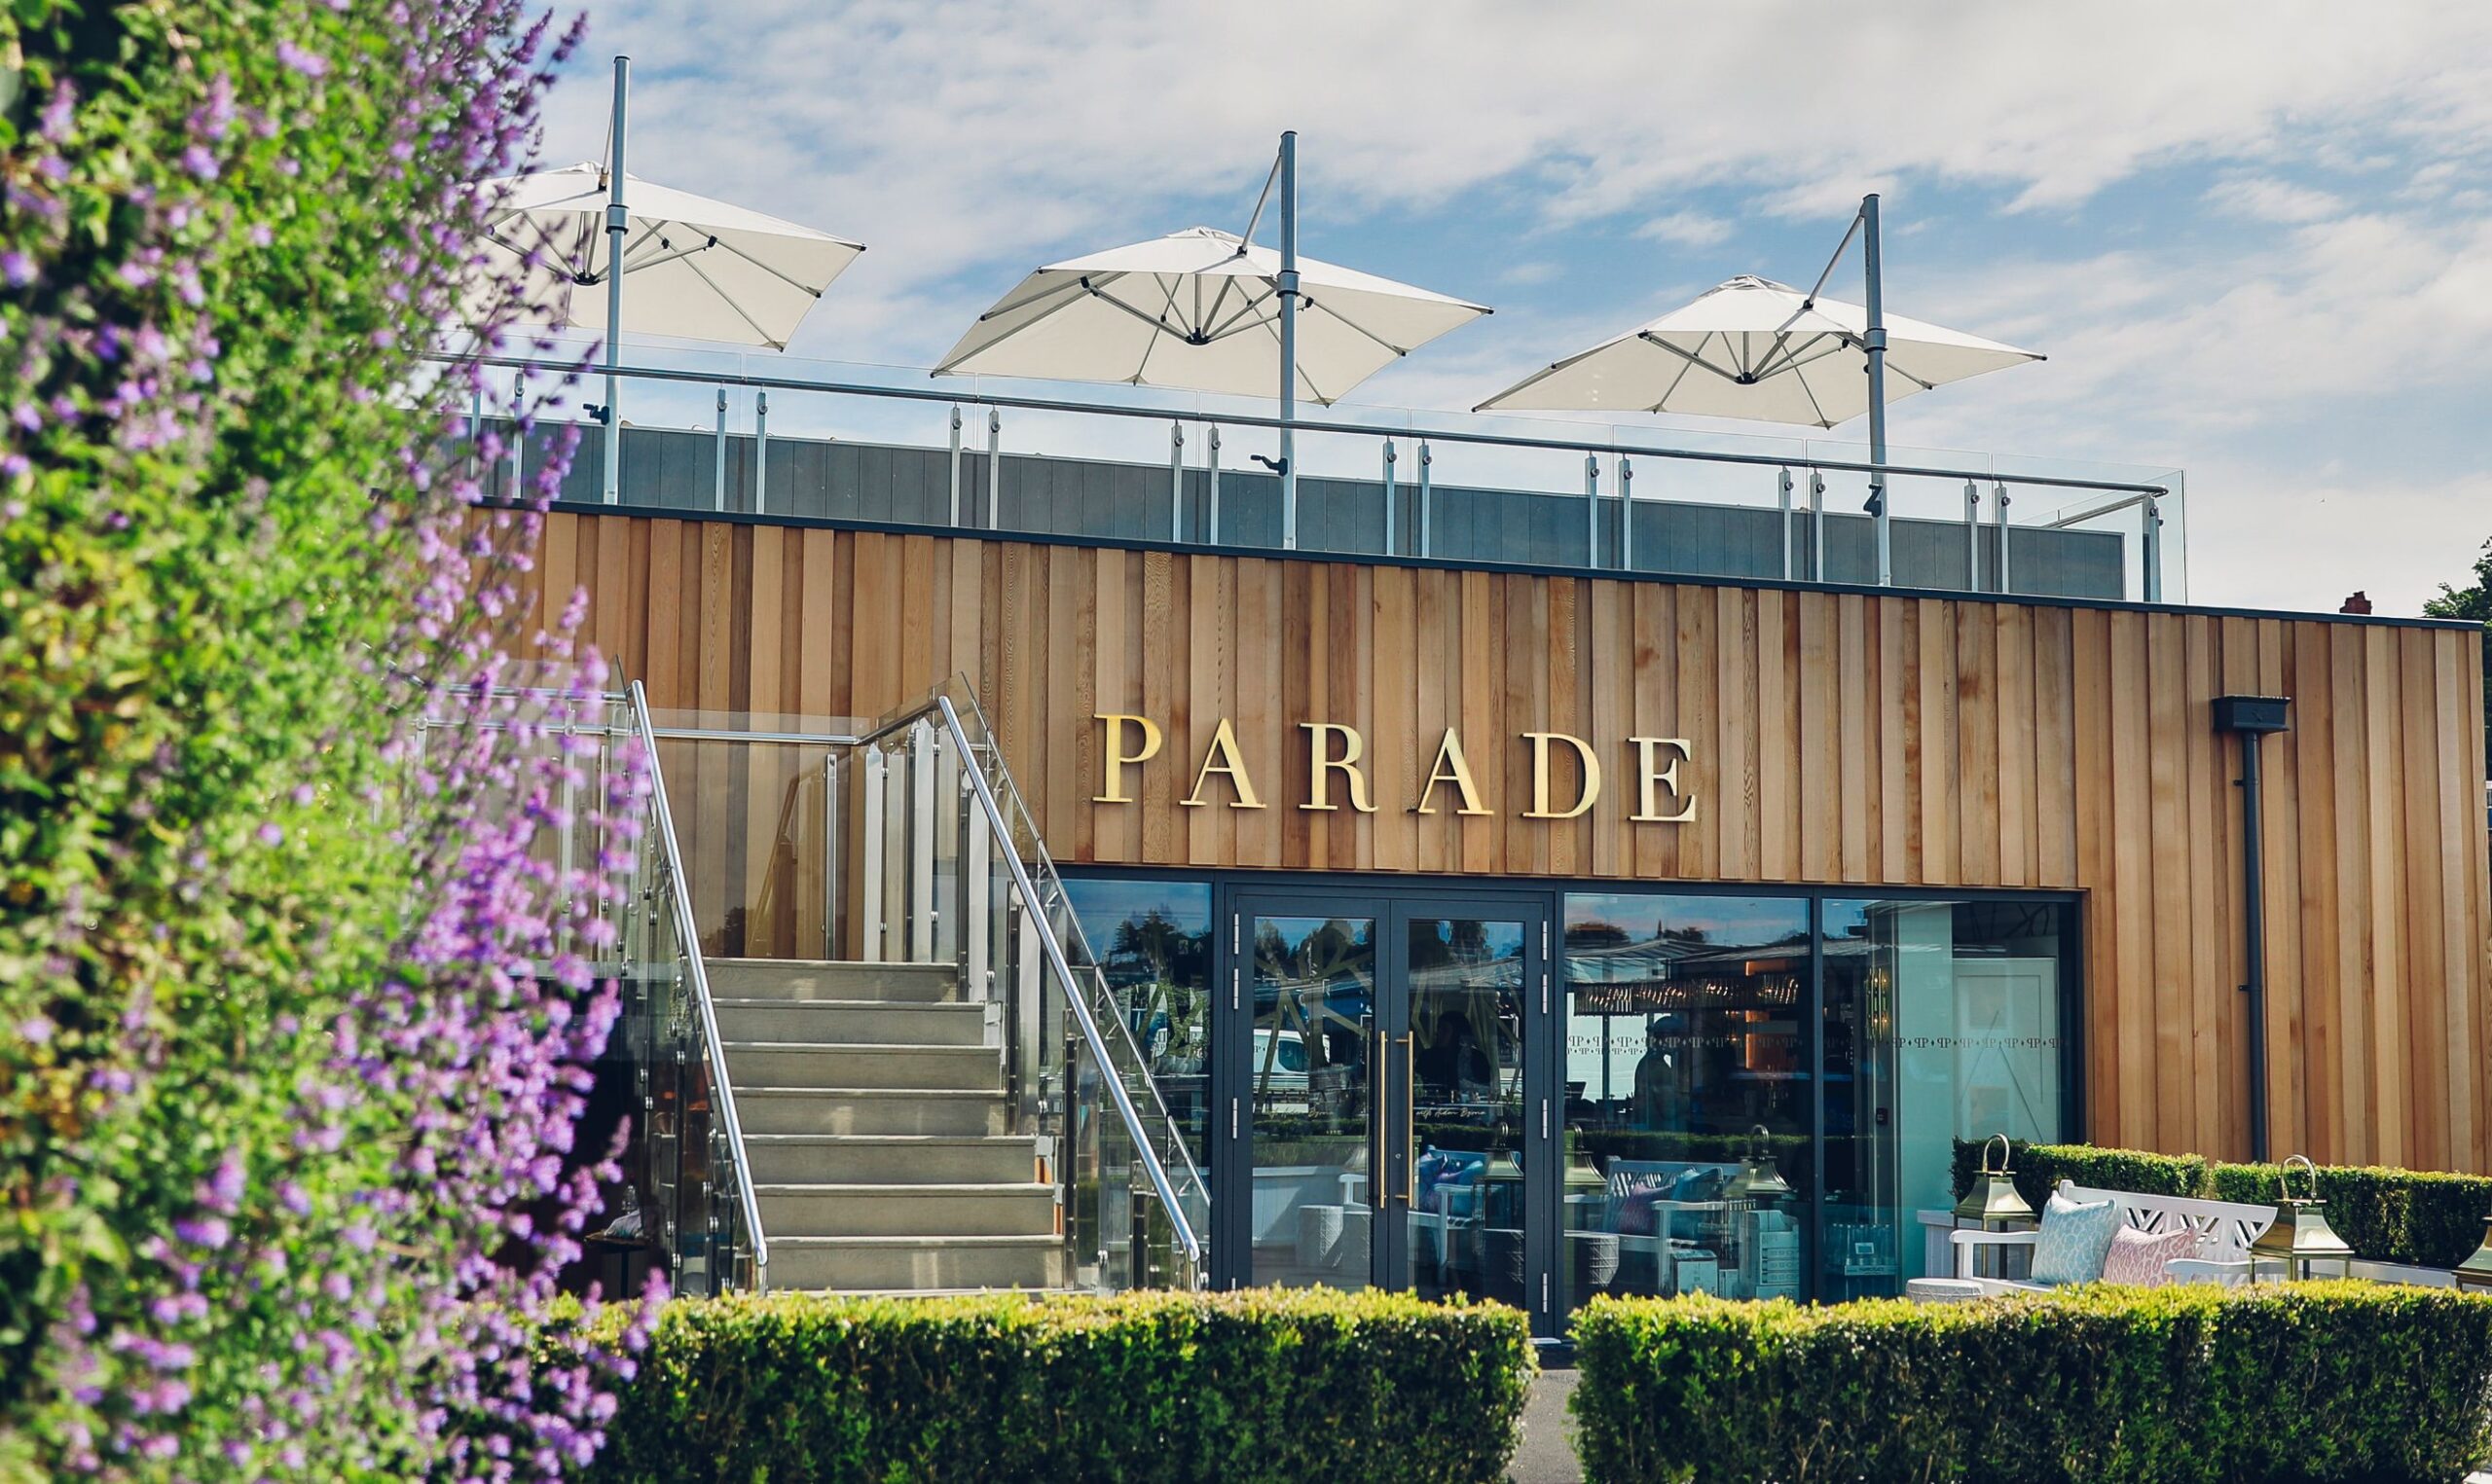 PARADE: An Intimate, Stylish, Hospitality Experience at Chester Racecourse thumbnail image